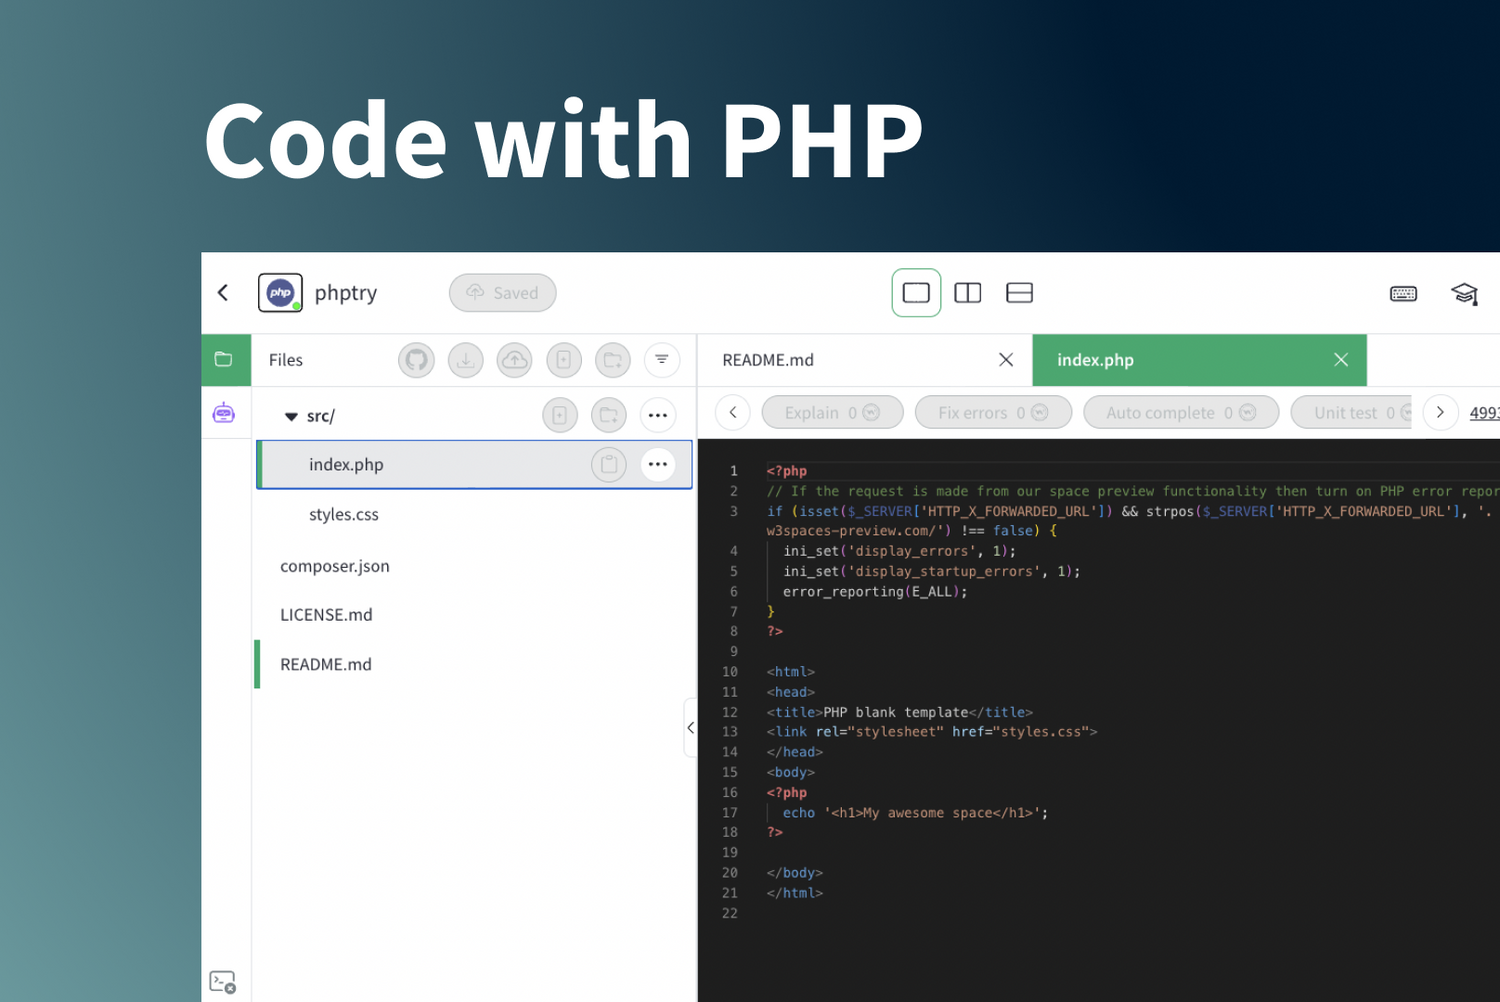 Why PHP?